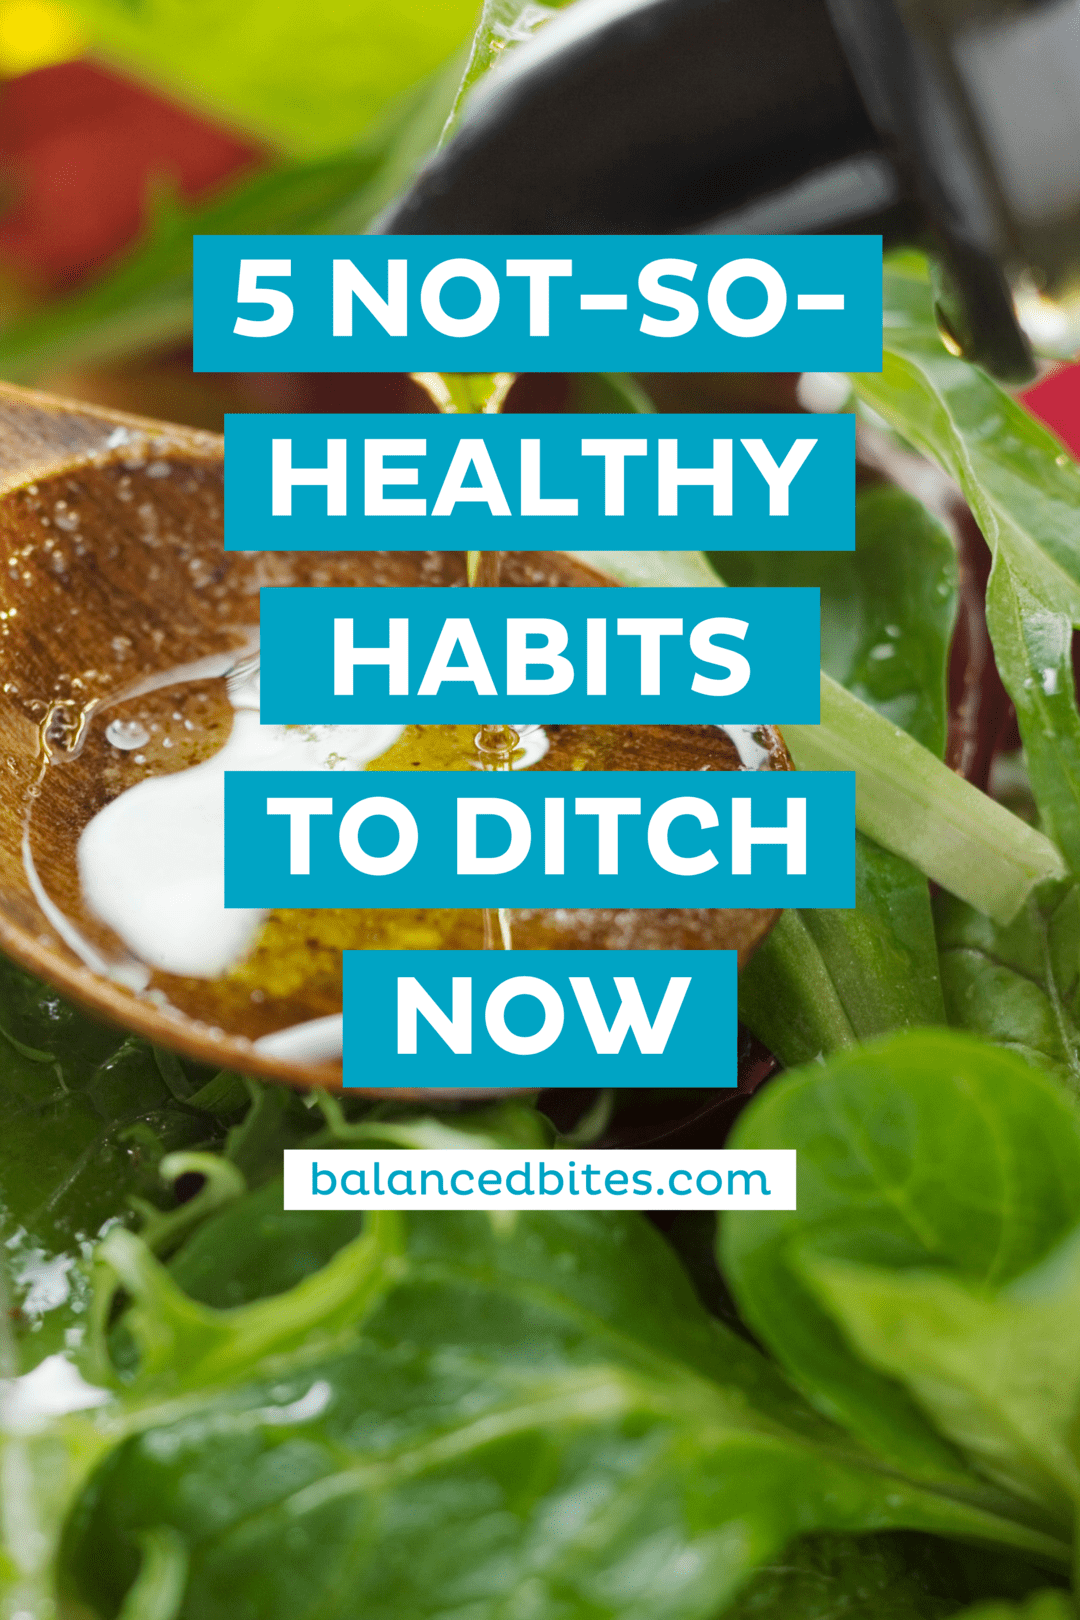 5 Not-So-Healthy Habits to Ditch Now | Balanced Bites